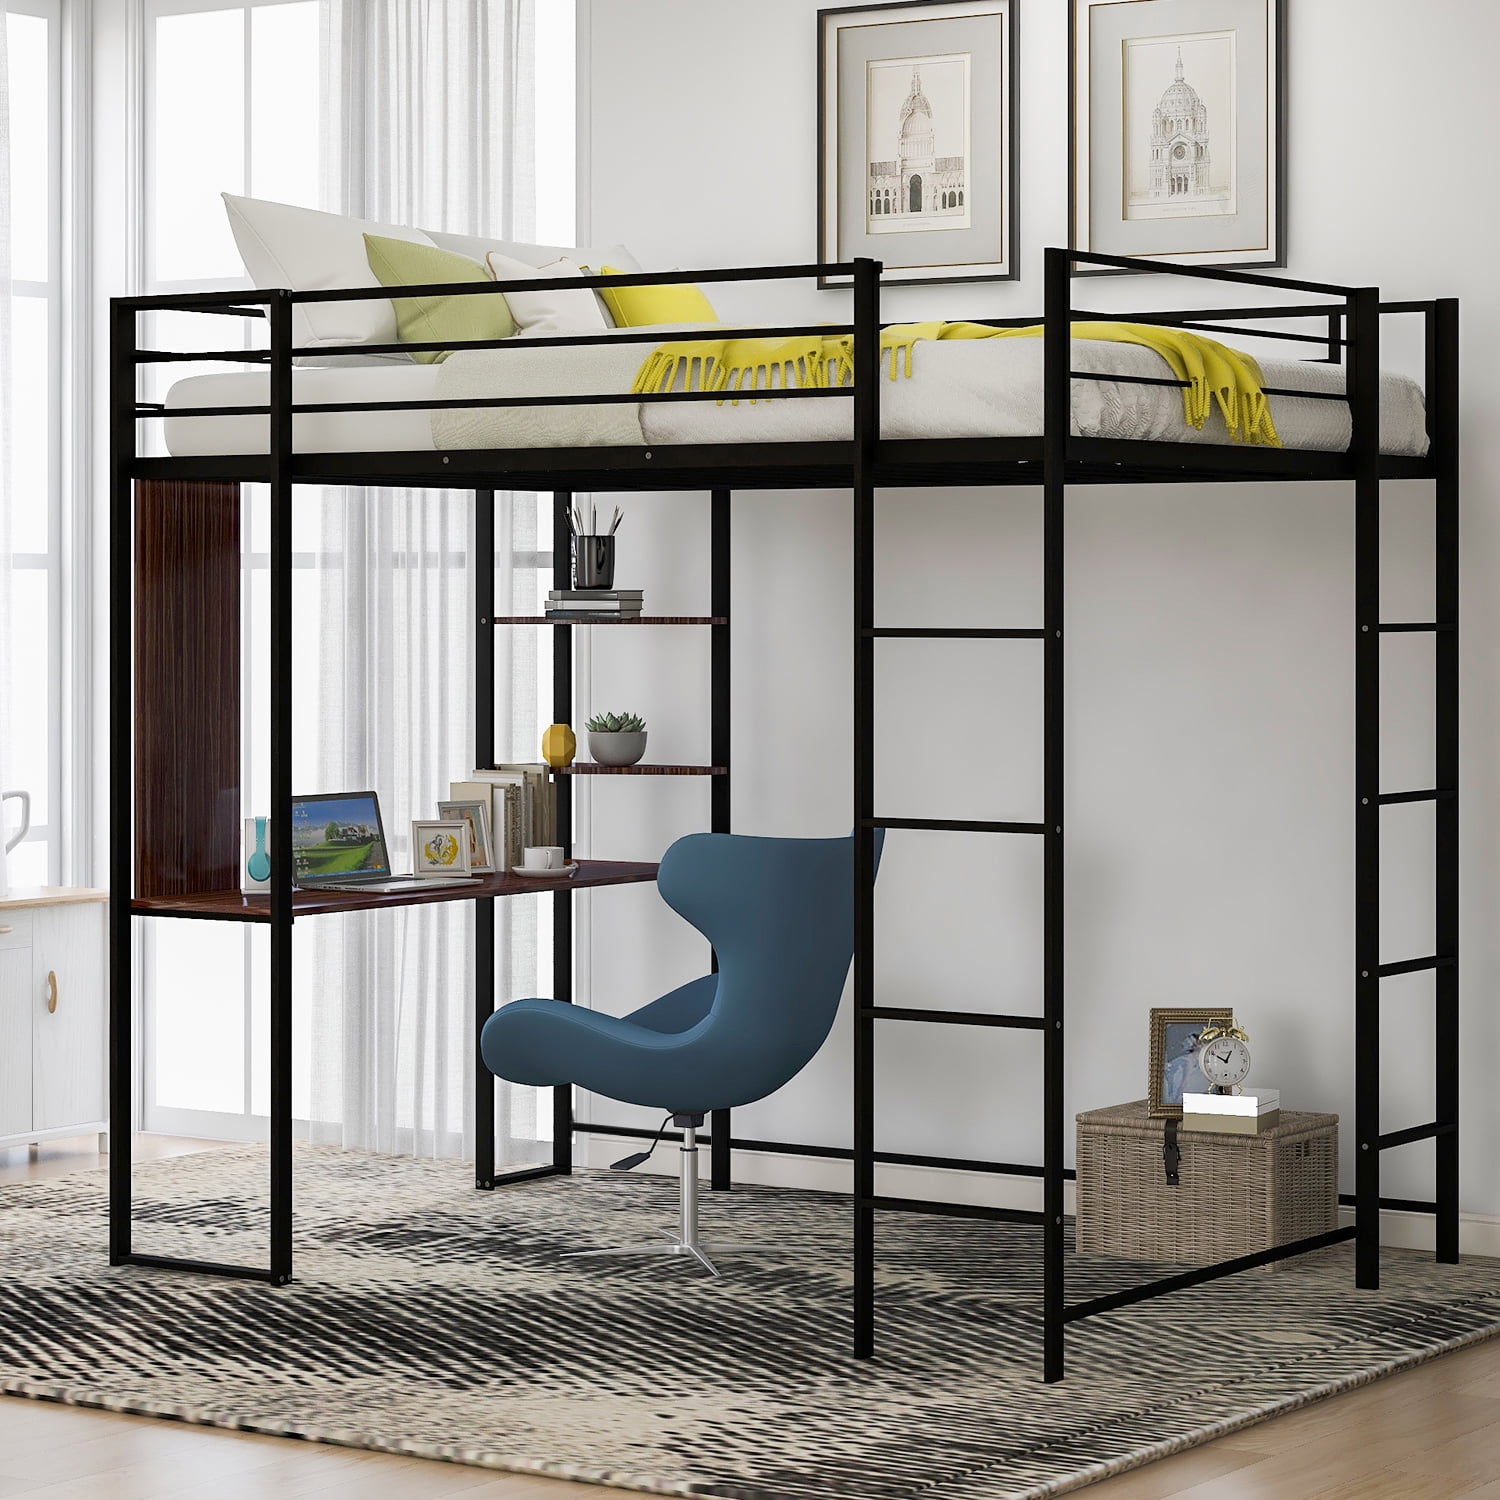 Sentern Metal Full Size Loft Bed With, Metal Bunk Bed With Desk Under